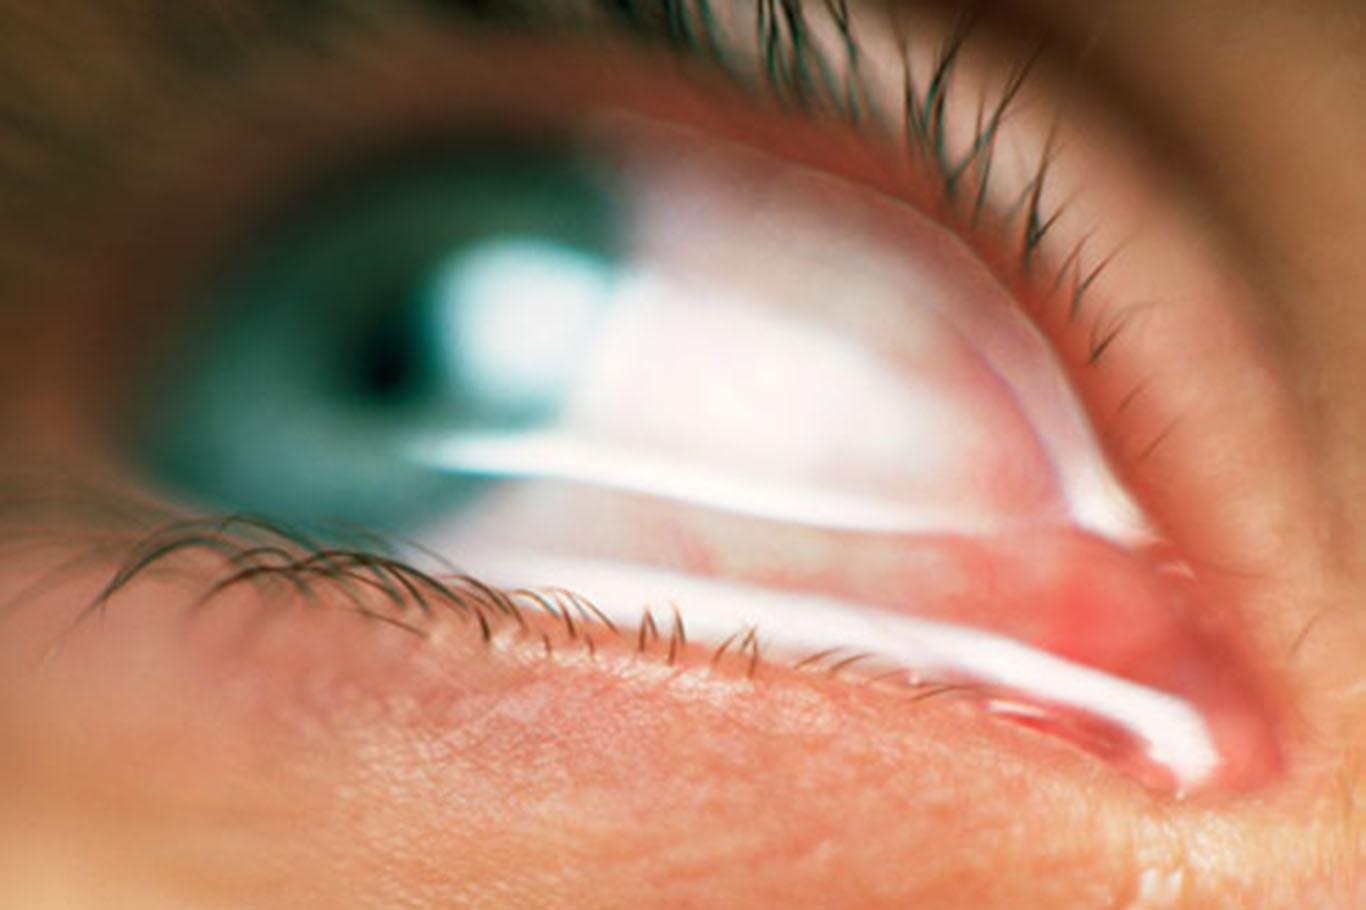 What causes mucus strands in the eyes?